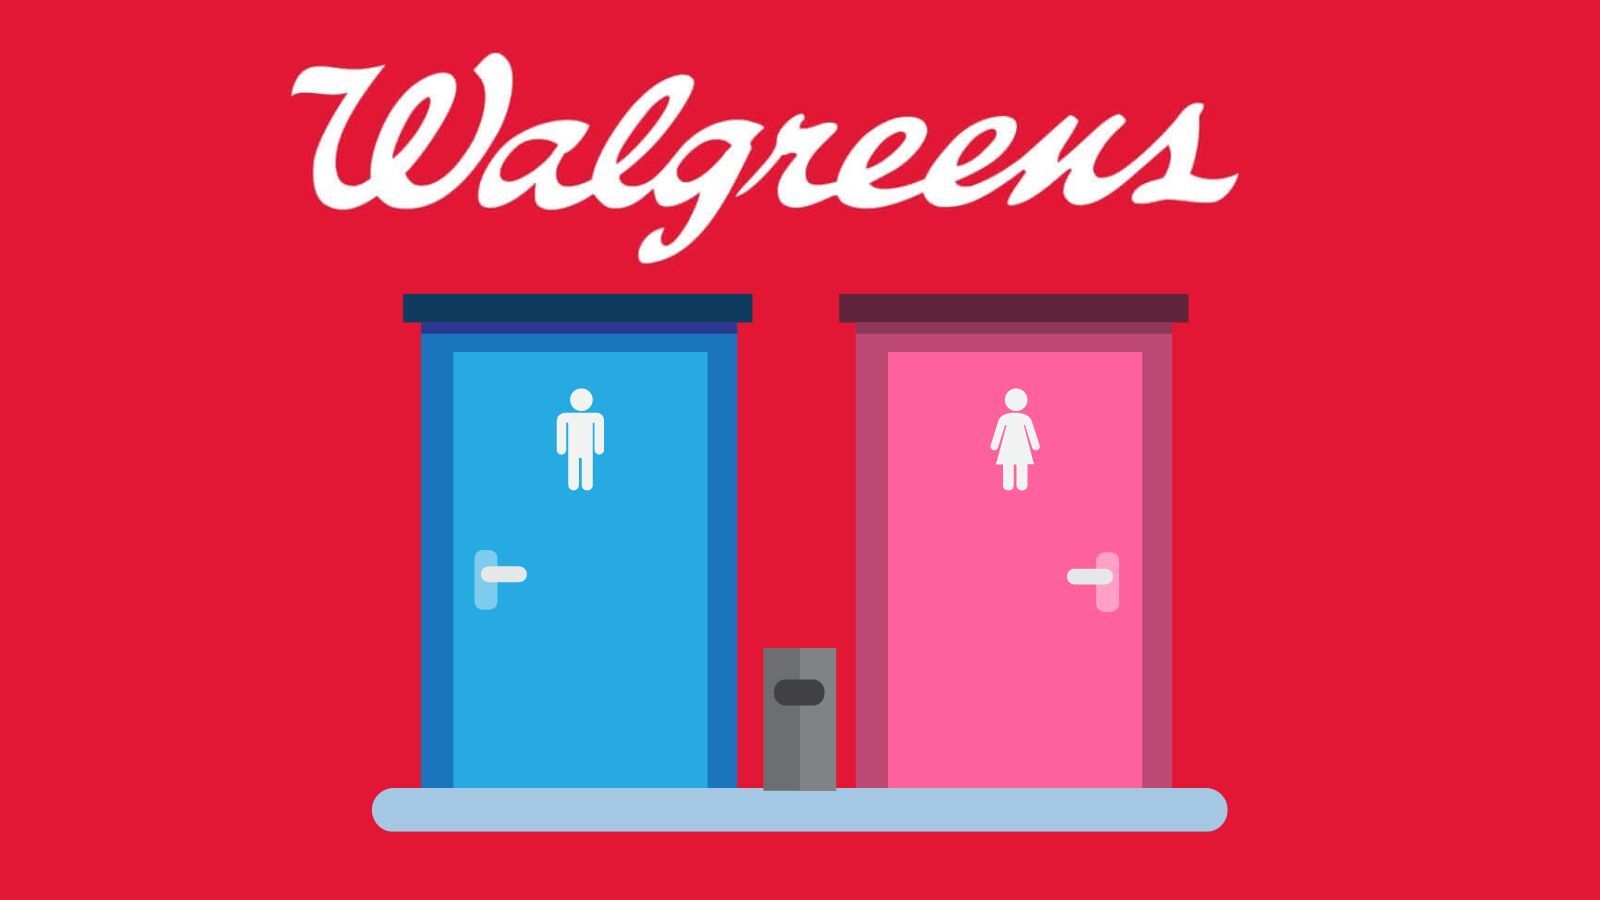 Does Walgreens Have Bathrooms for Customers? [Yes]